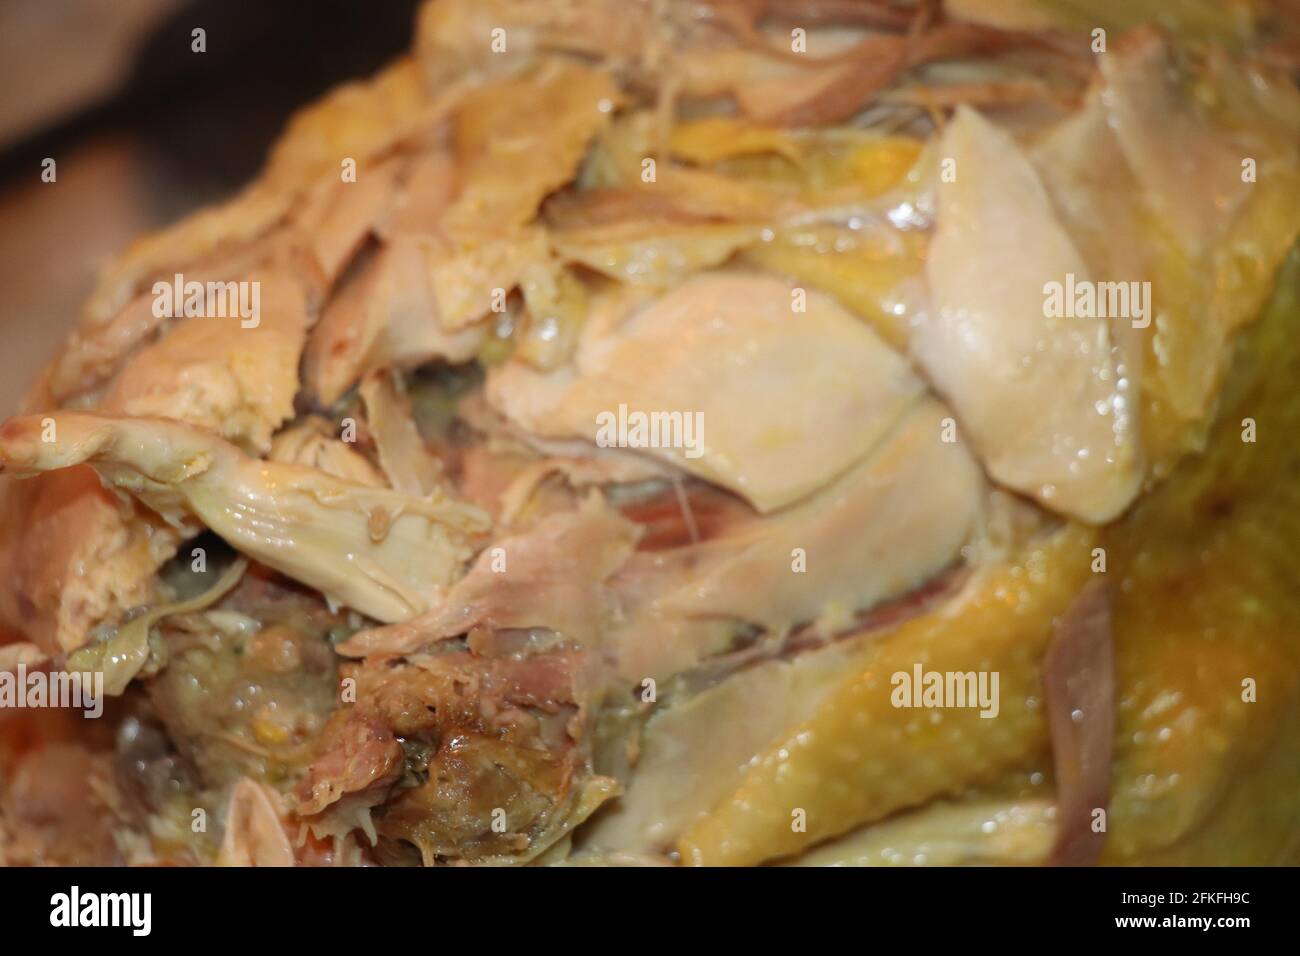 homemade stuffed capon on wooden cutting board Stock Photo